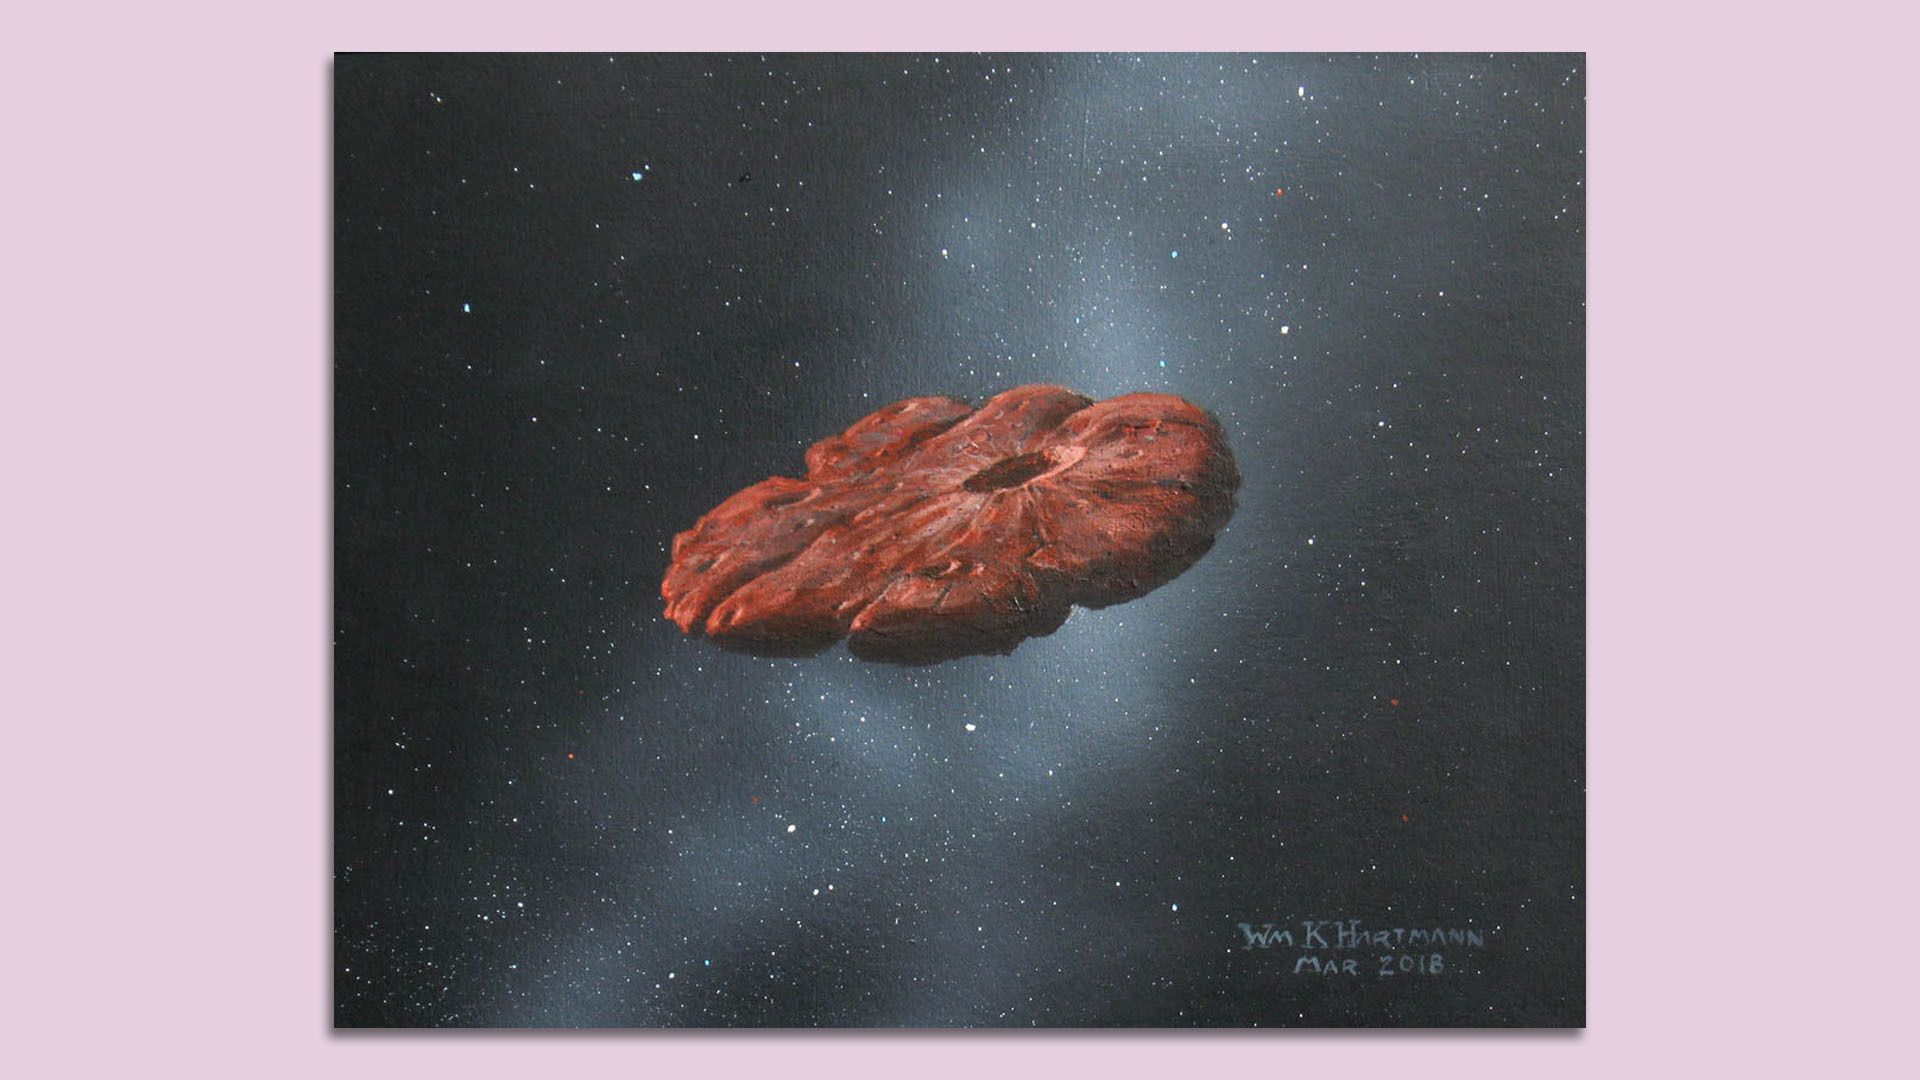 An artist's rendition of Oumuamua, which one Axios visuals editor referred to as a "steak in space."